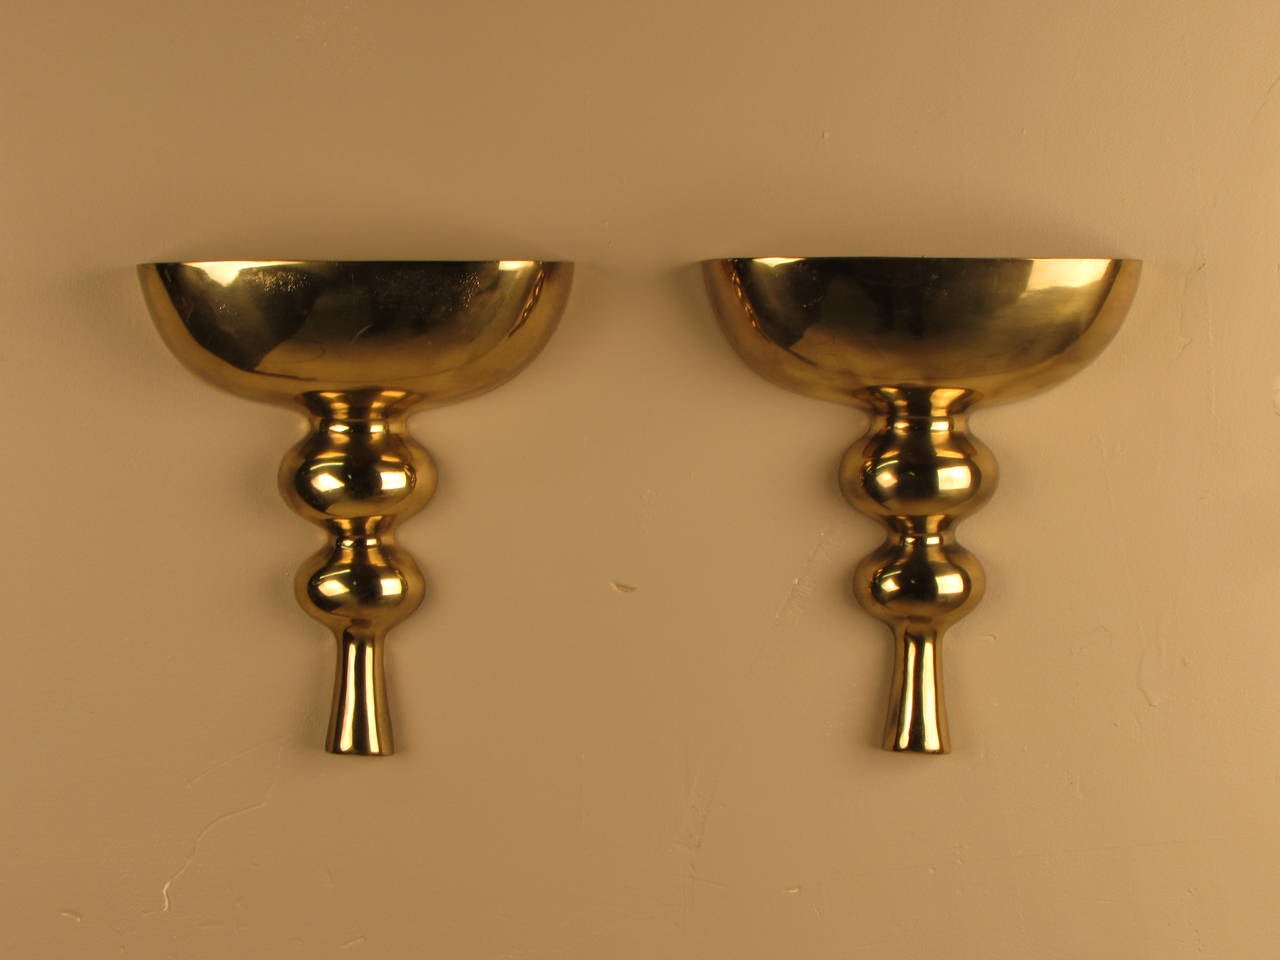 Stunning pair of cast brass wall mount candelabra or candle holders by Tony Paul. Each piece holds 3 standard taper candles.